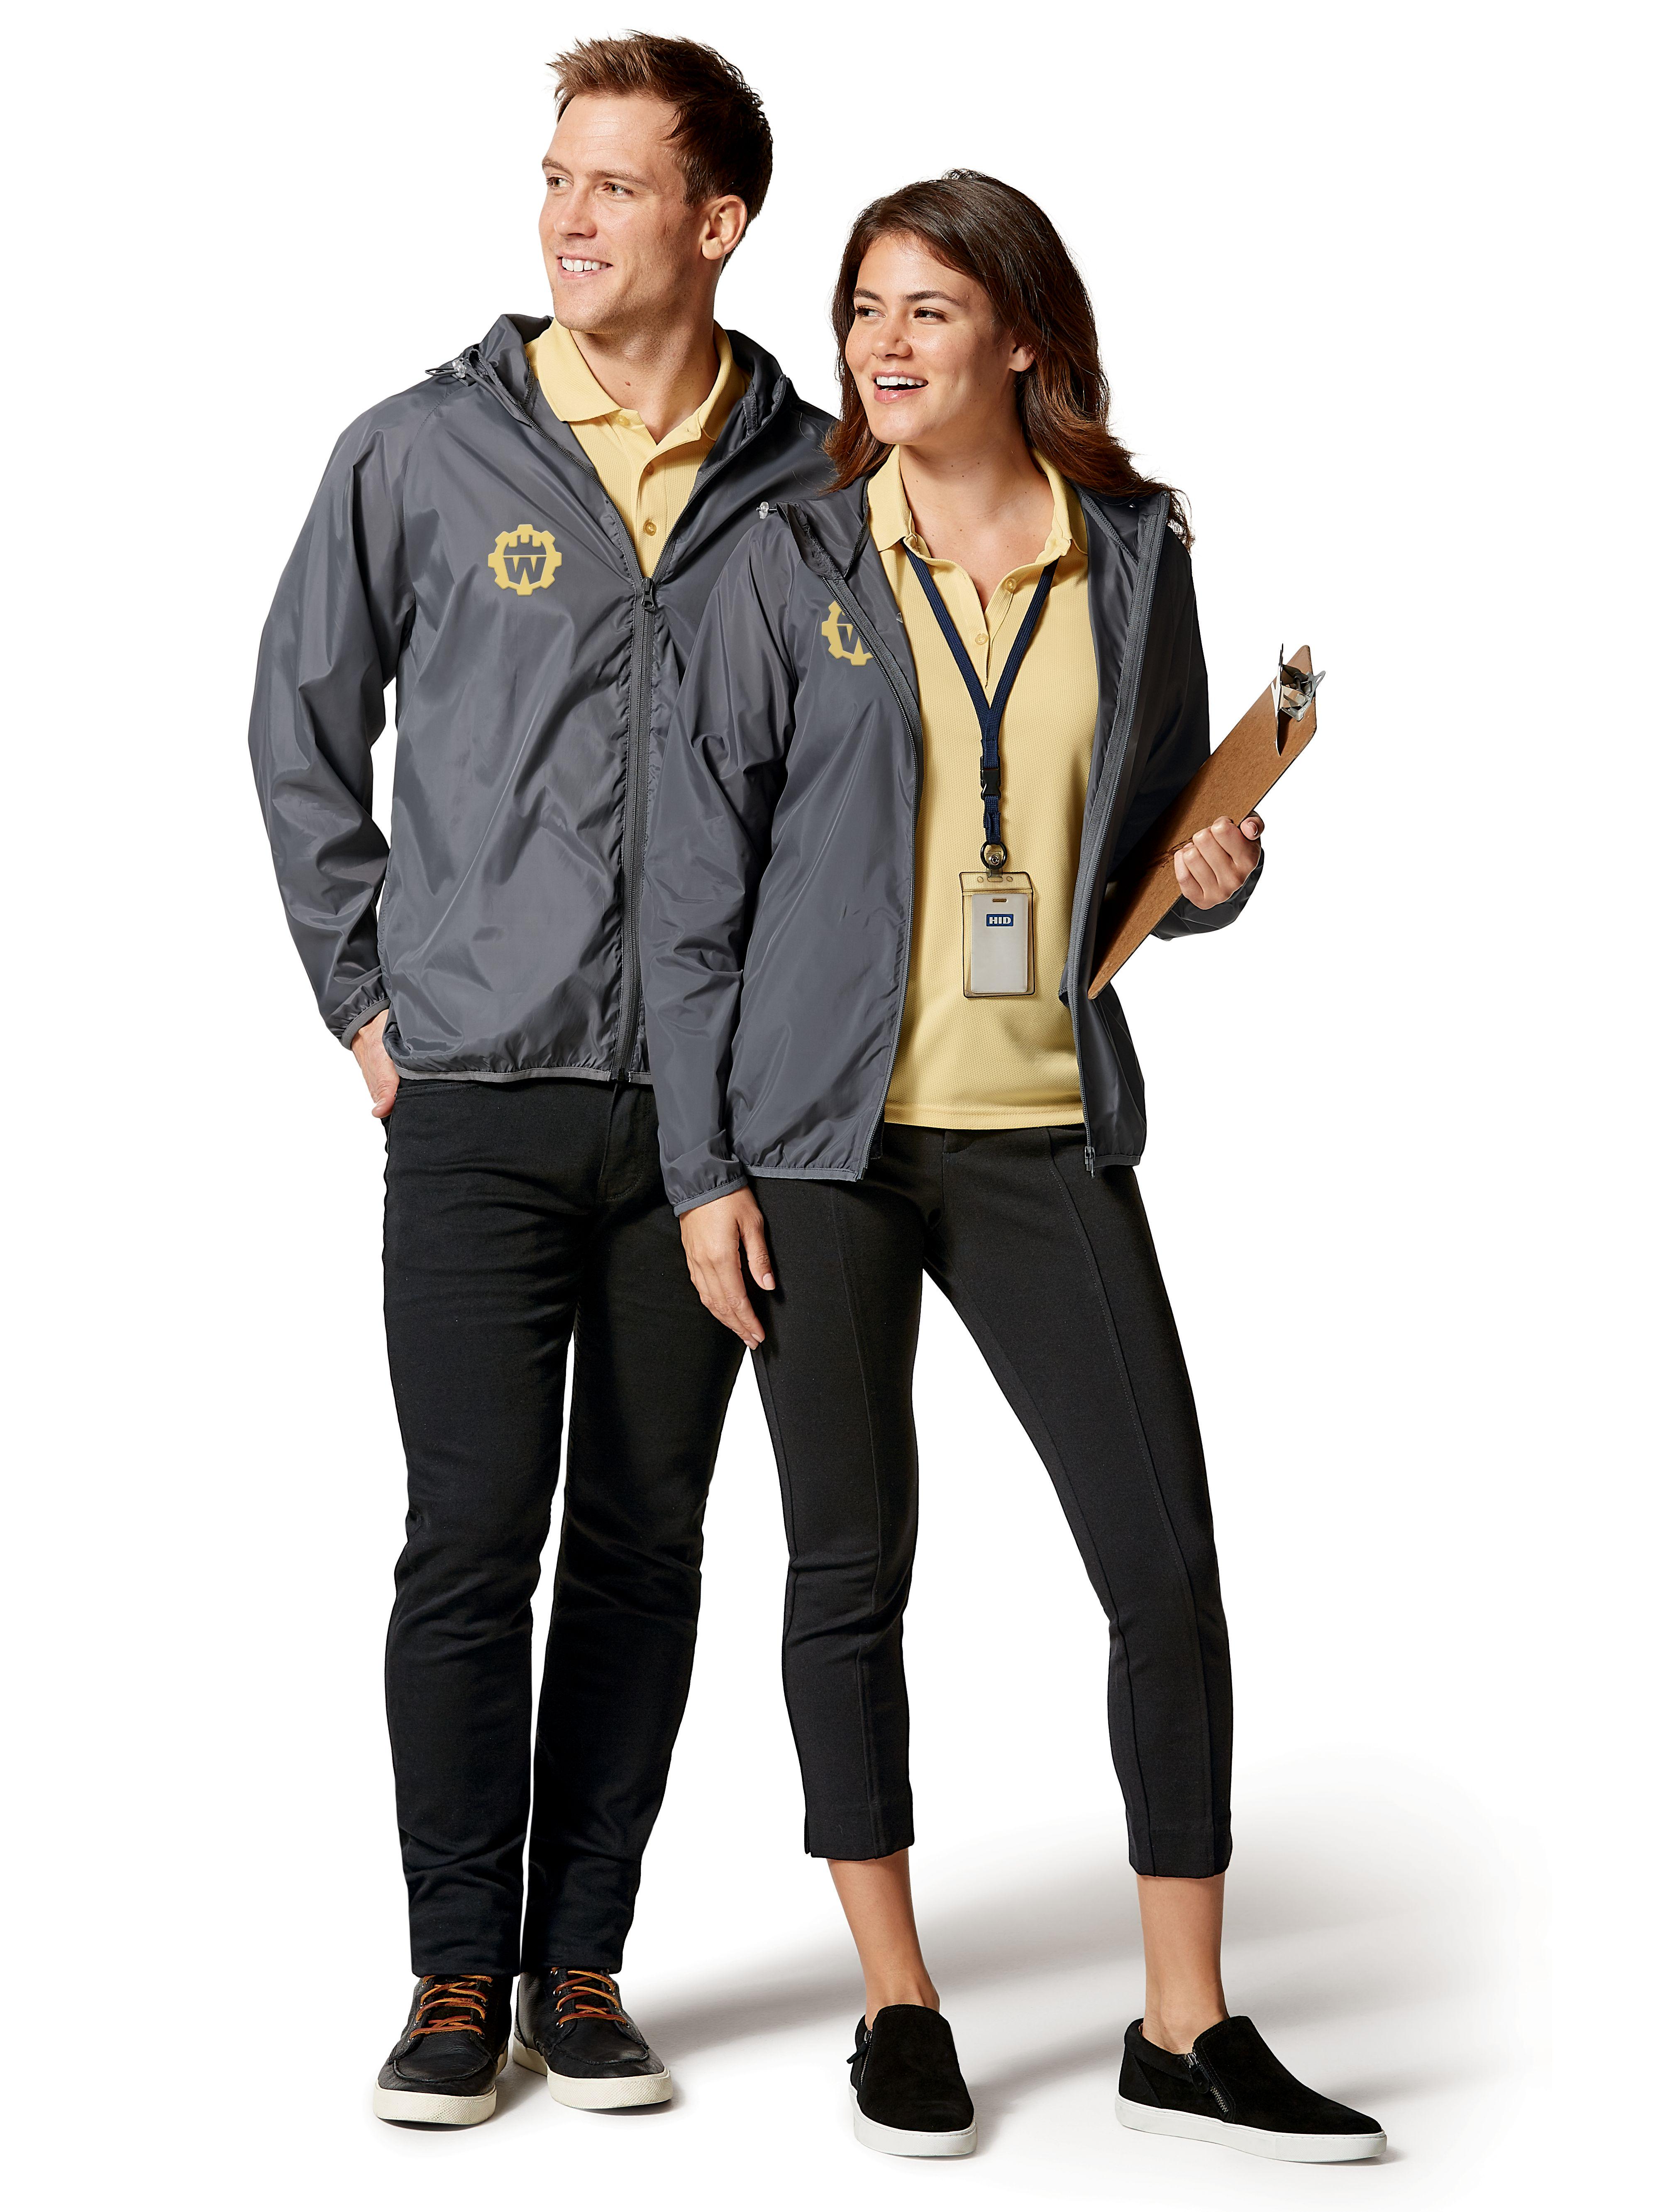 Clique Reliance Lady Packable Jacket - image 2 of 2